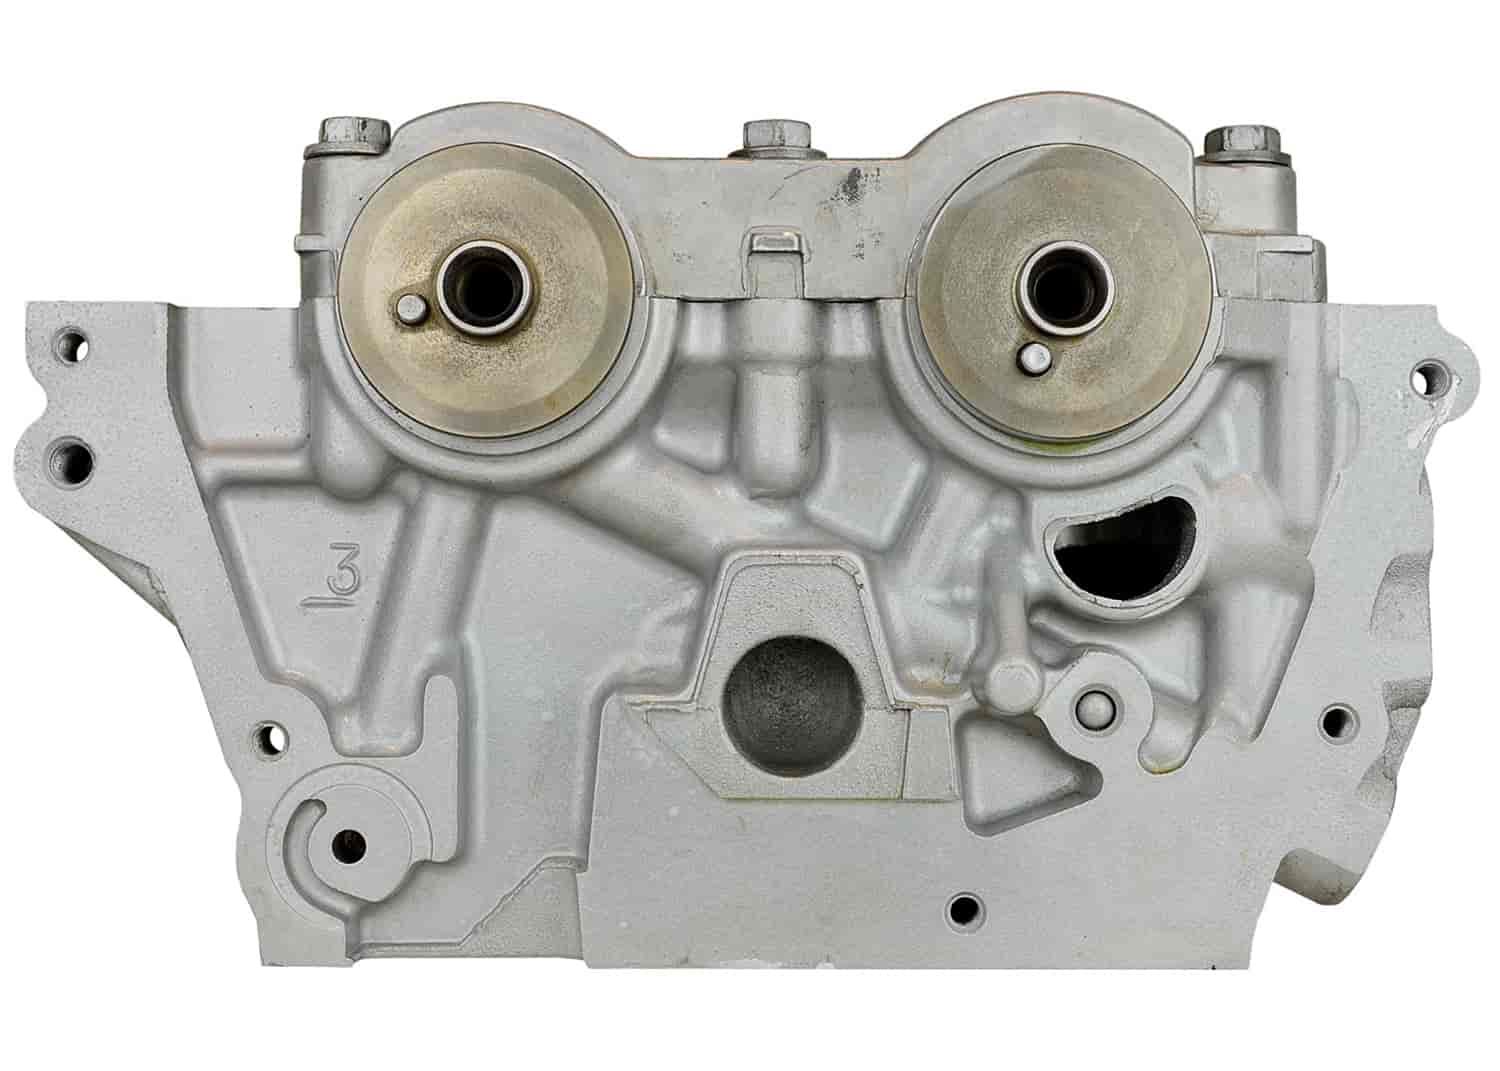 Remanufactured Cylinder Head for 1998-1999 Toyota/Chevy with 1.8L L4 1ZZFE